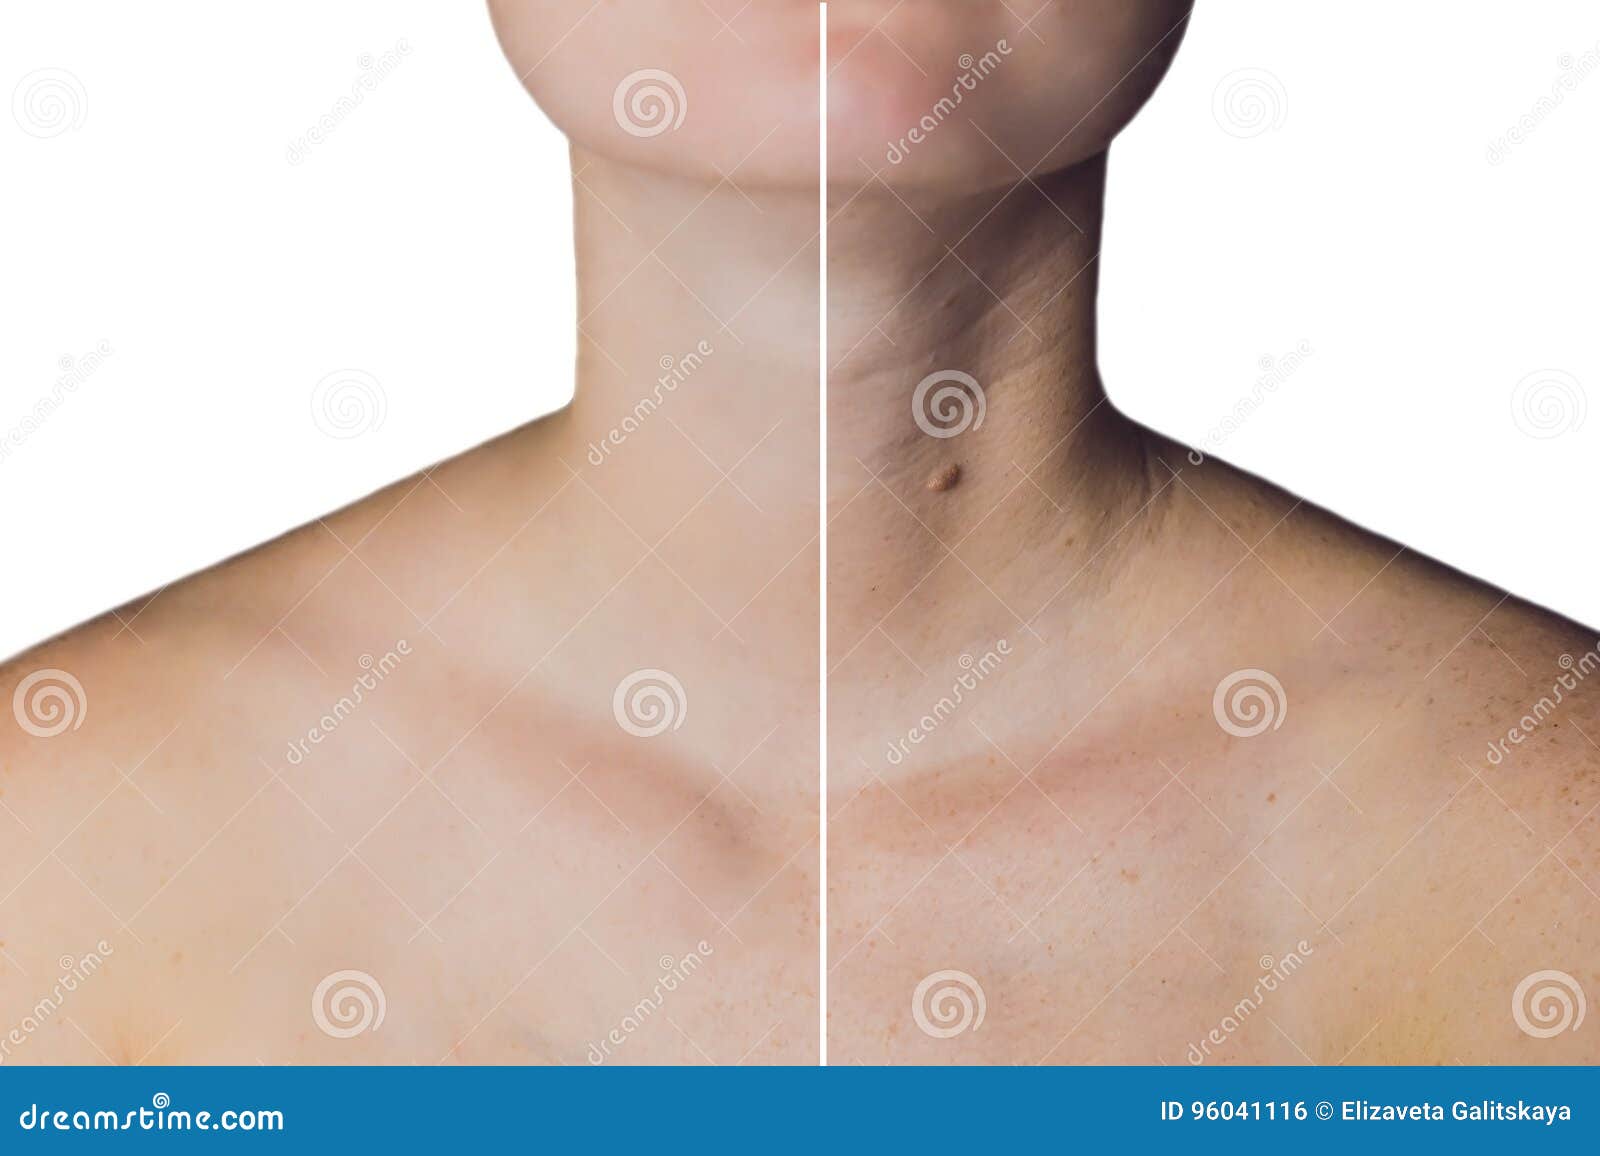 neck of a woman before and after botox. young and old neck